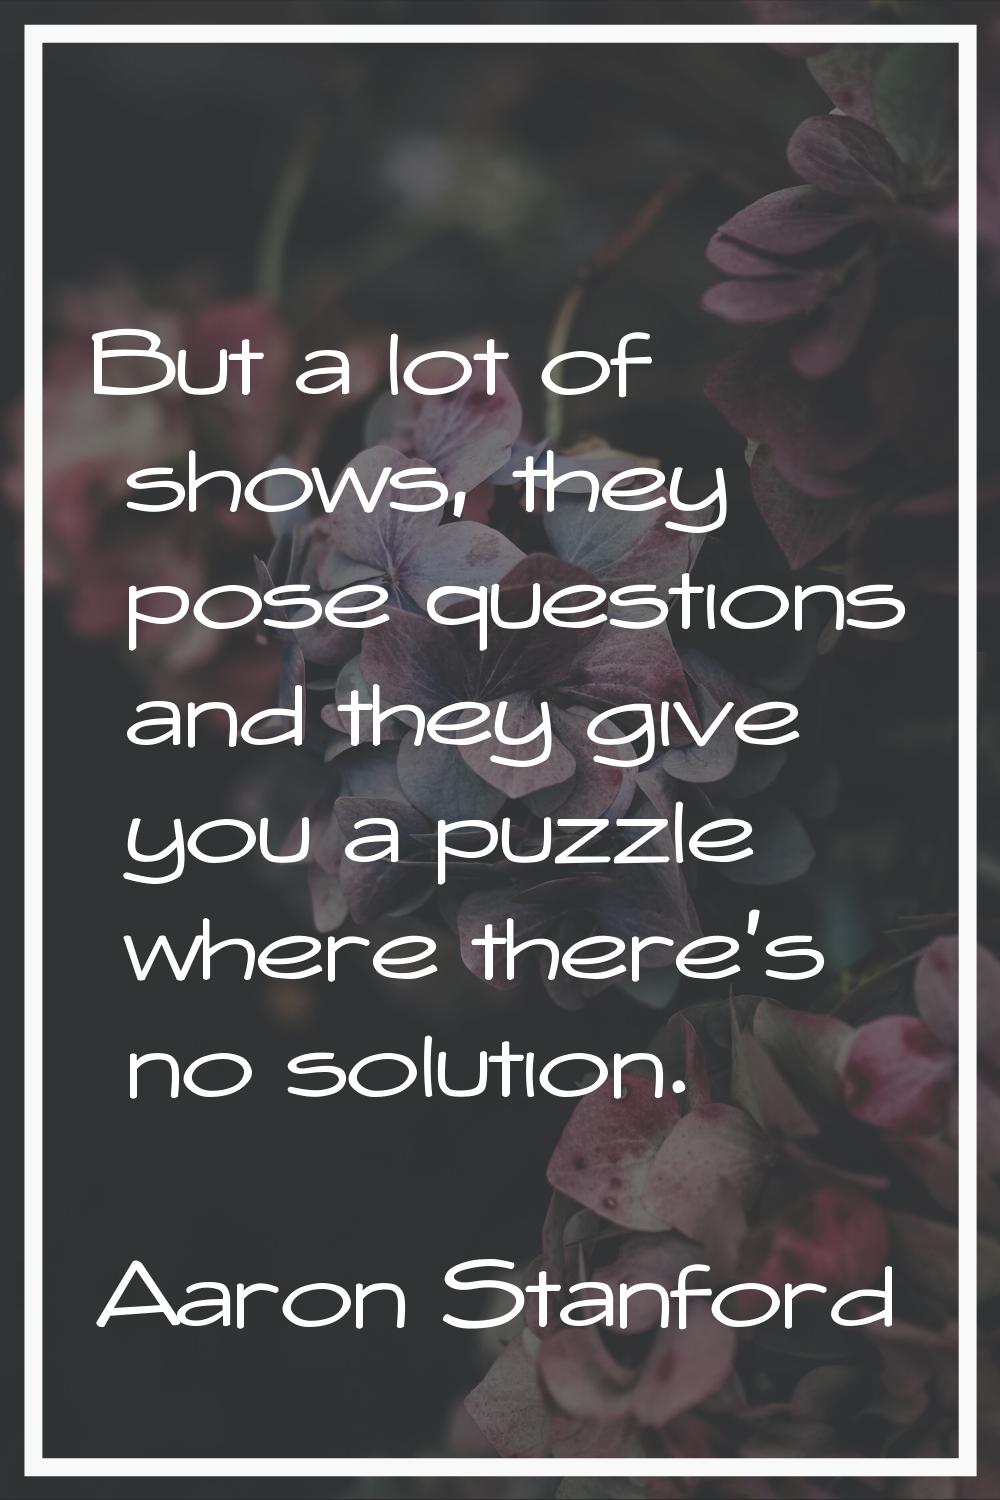 But a lot of shows, they pose questions and they give you a puzzle where there's no solution.